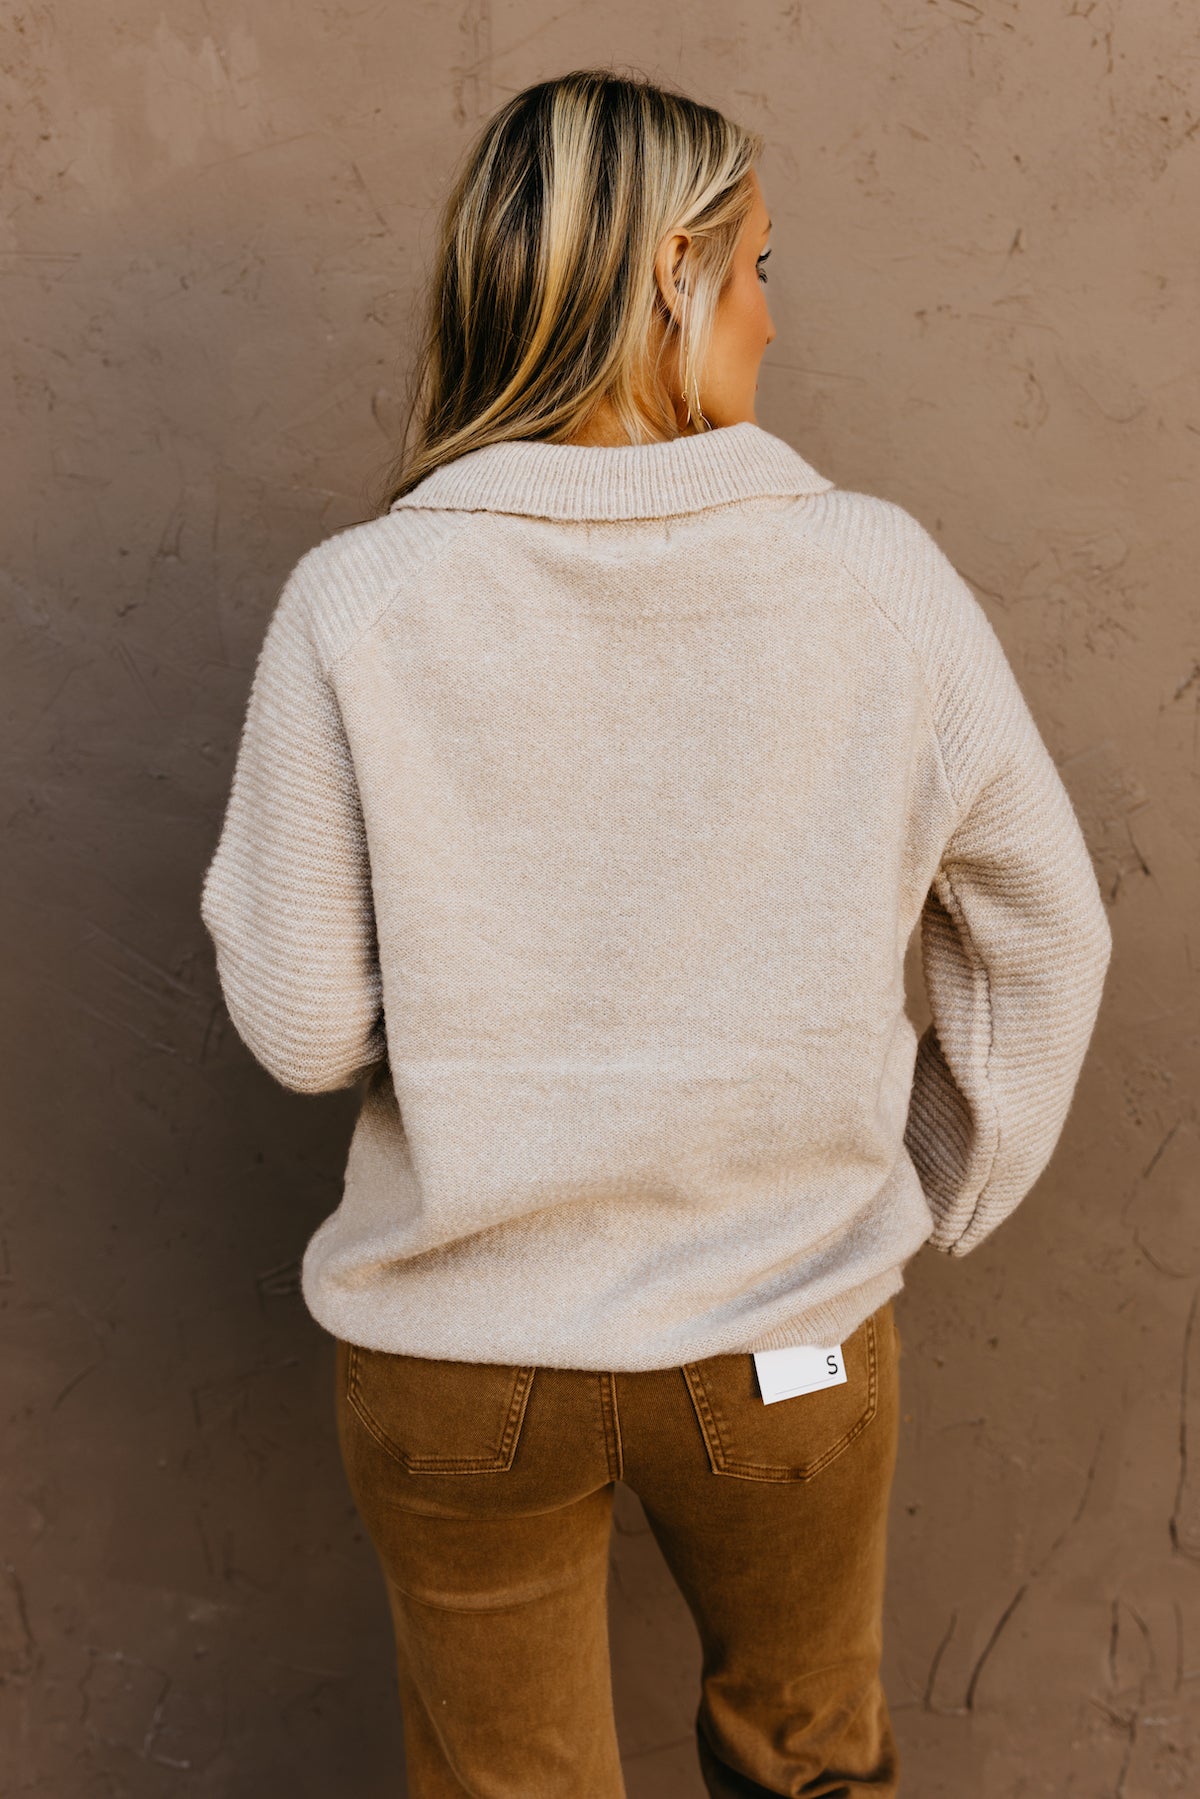 The Snowflake Mock Neck Sweater  - FINAL SALE